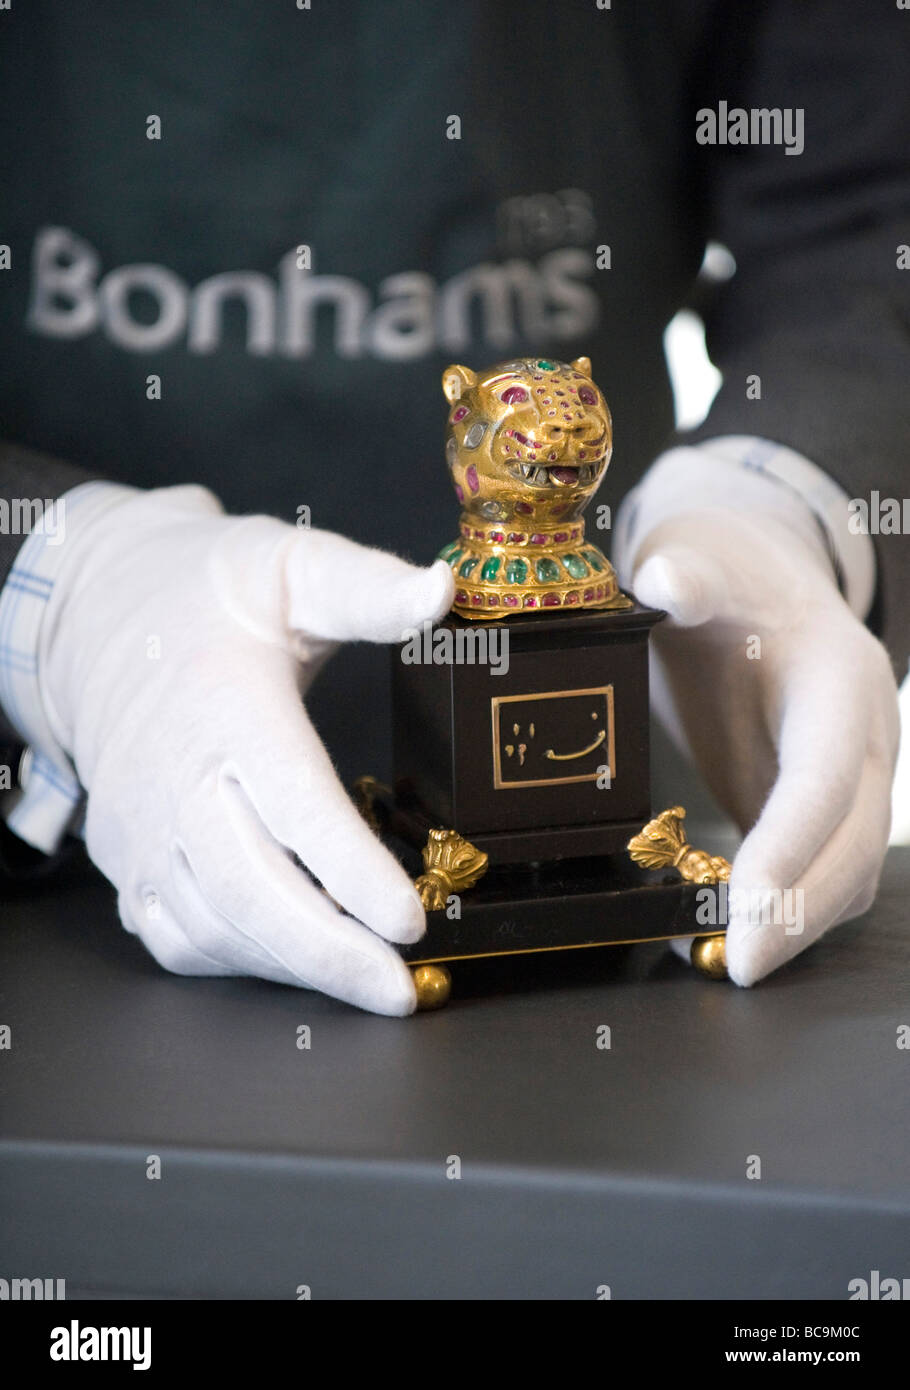 A Bonhams auction house employee holding a gem-encrusted gold finial from the octagonal golden throne of India's Tipu Sultan Stock Photo